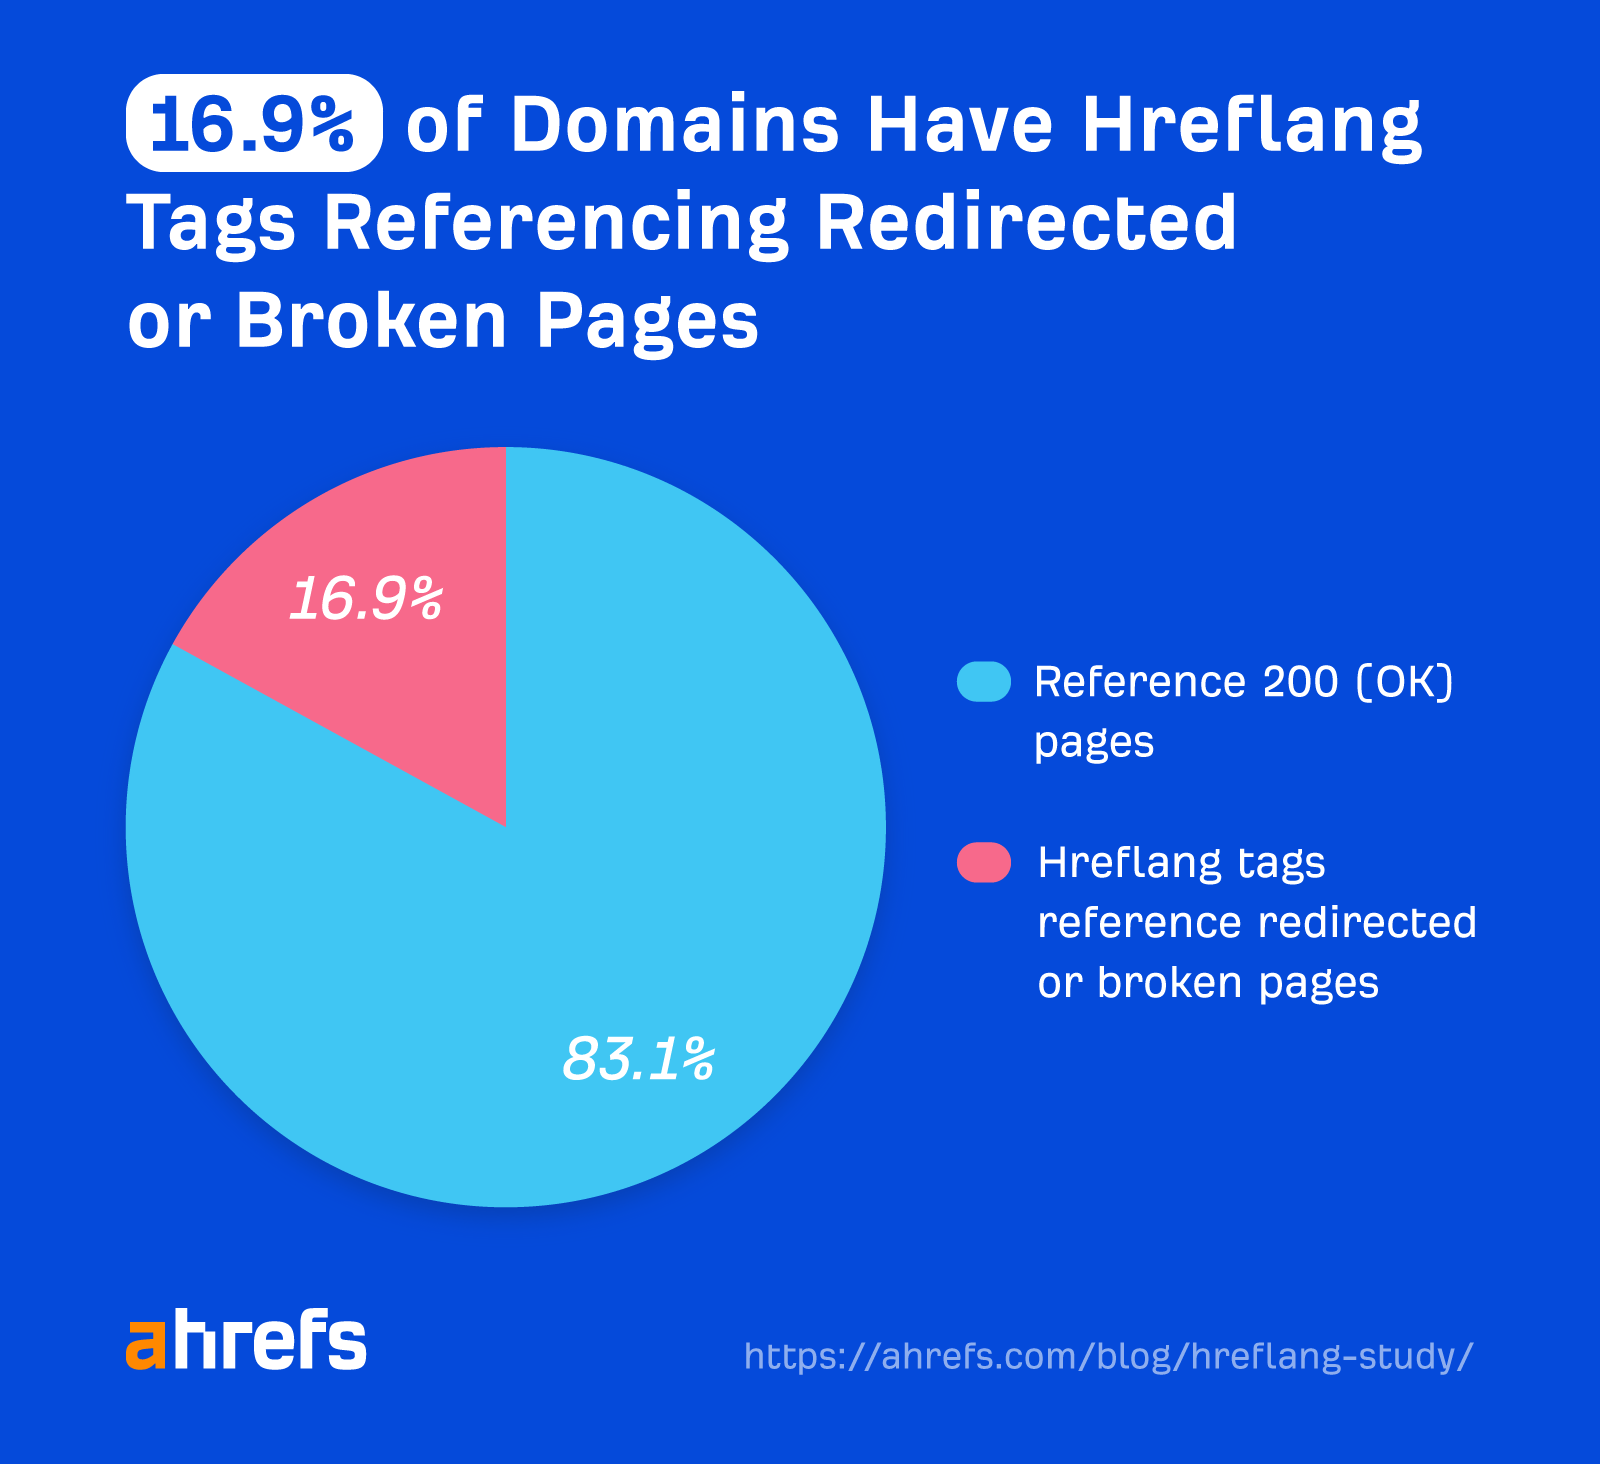 16.9% of domains have hreflang tags referencing redirected or broken pages